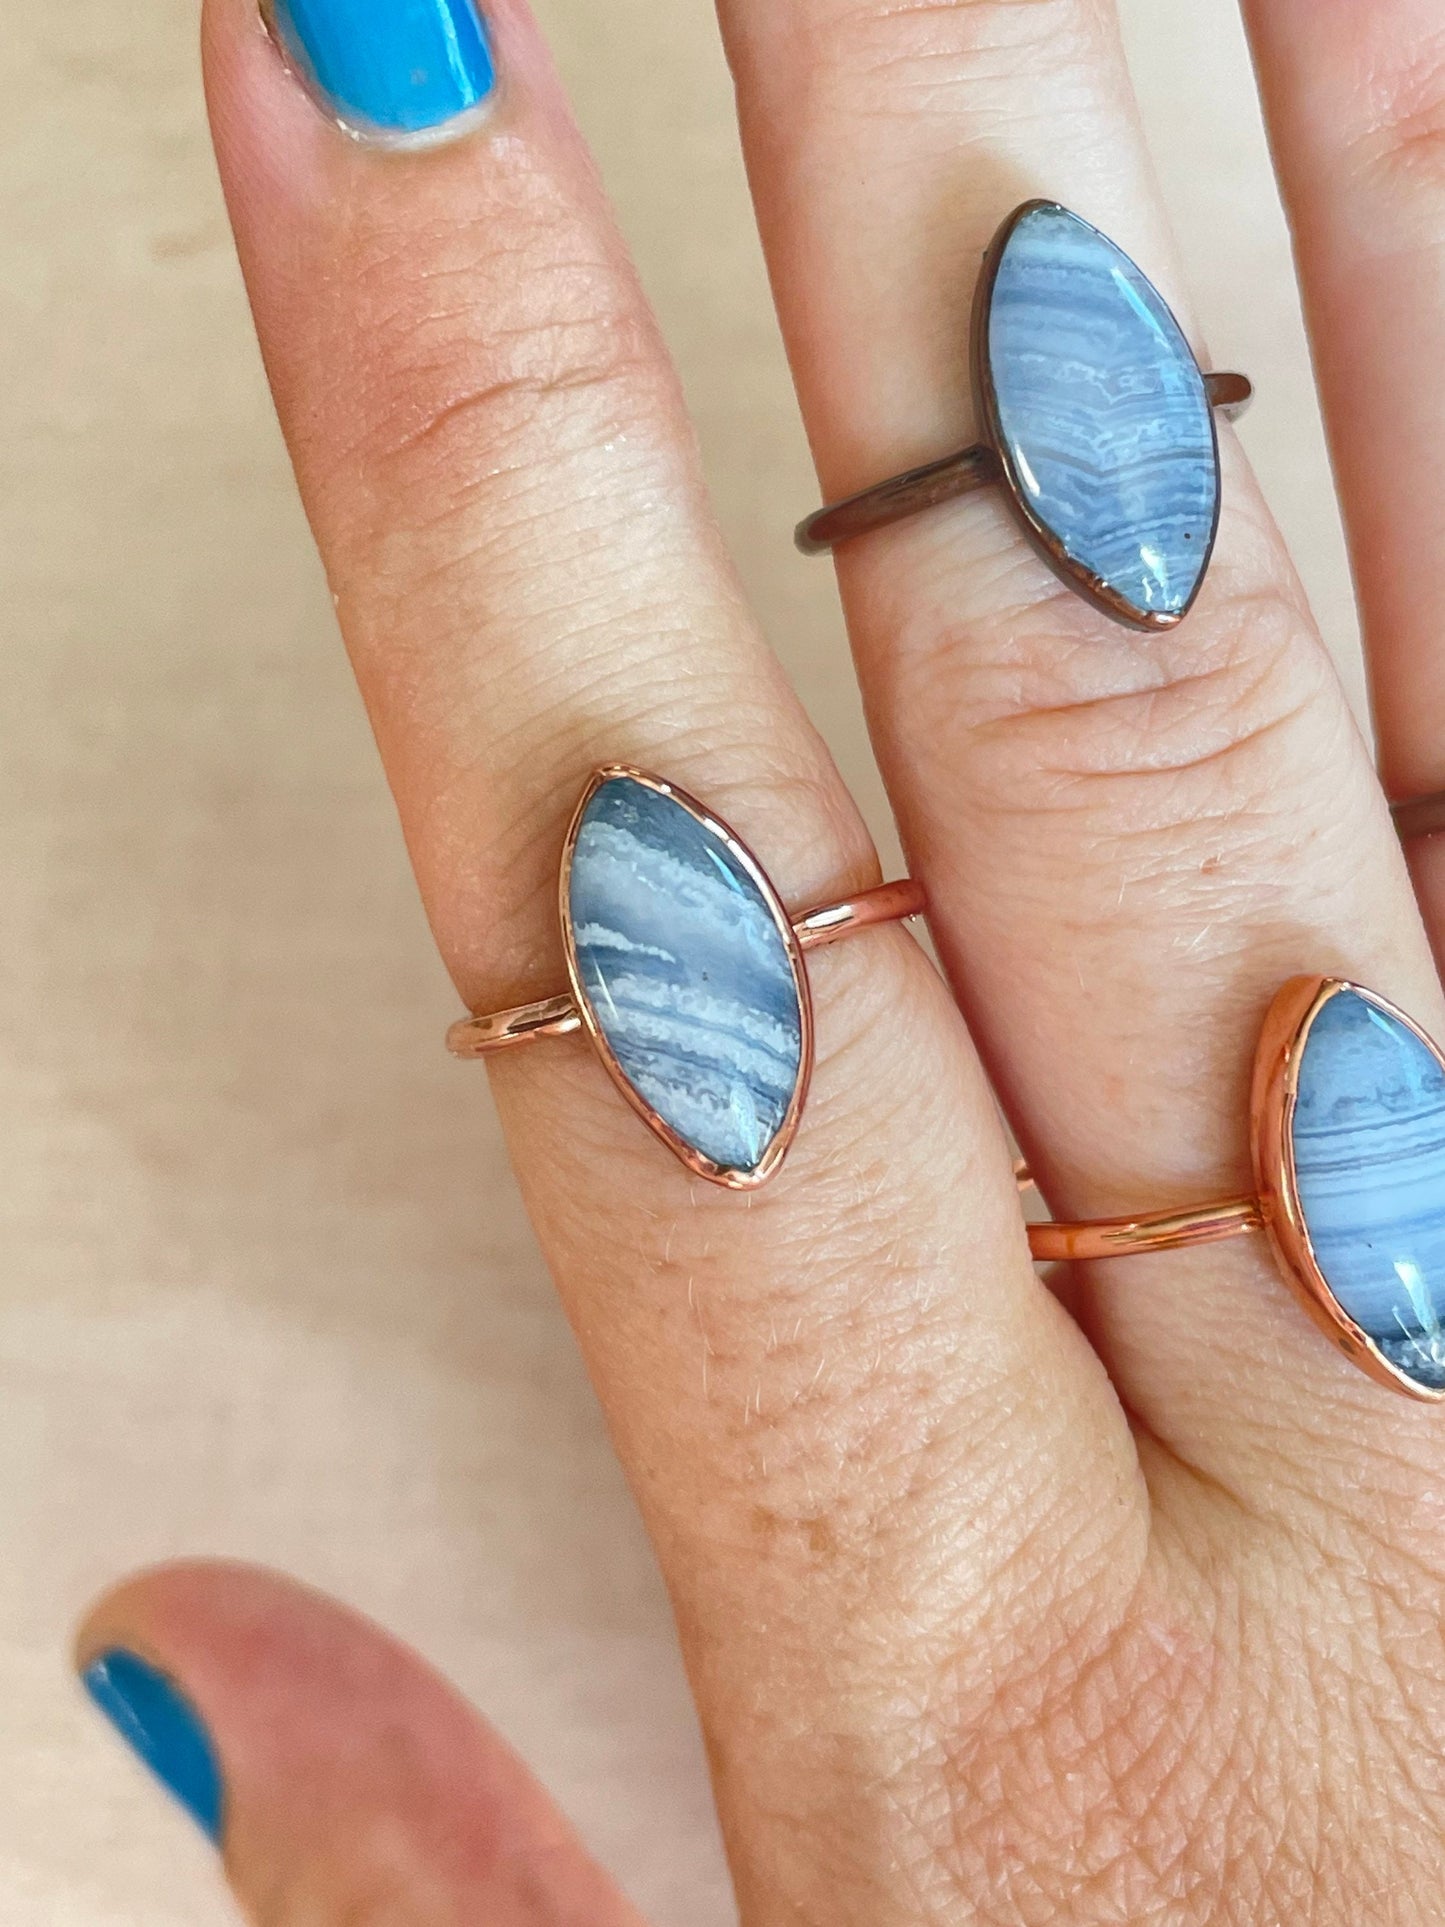 Blue Lace Agate Electroformed Ring 